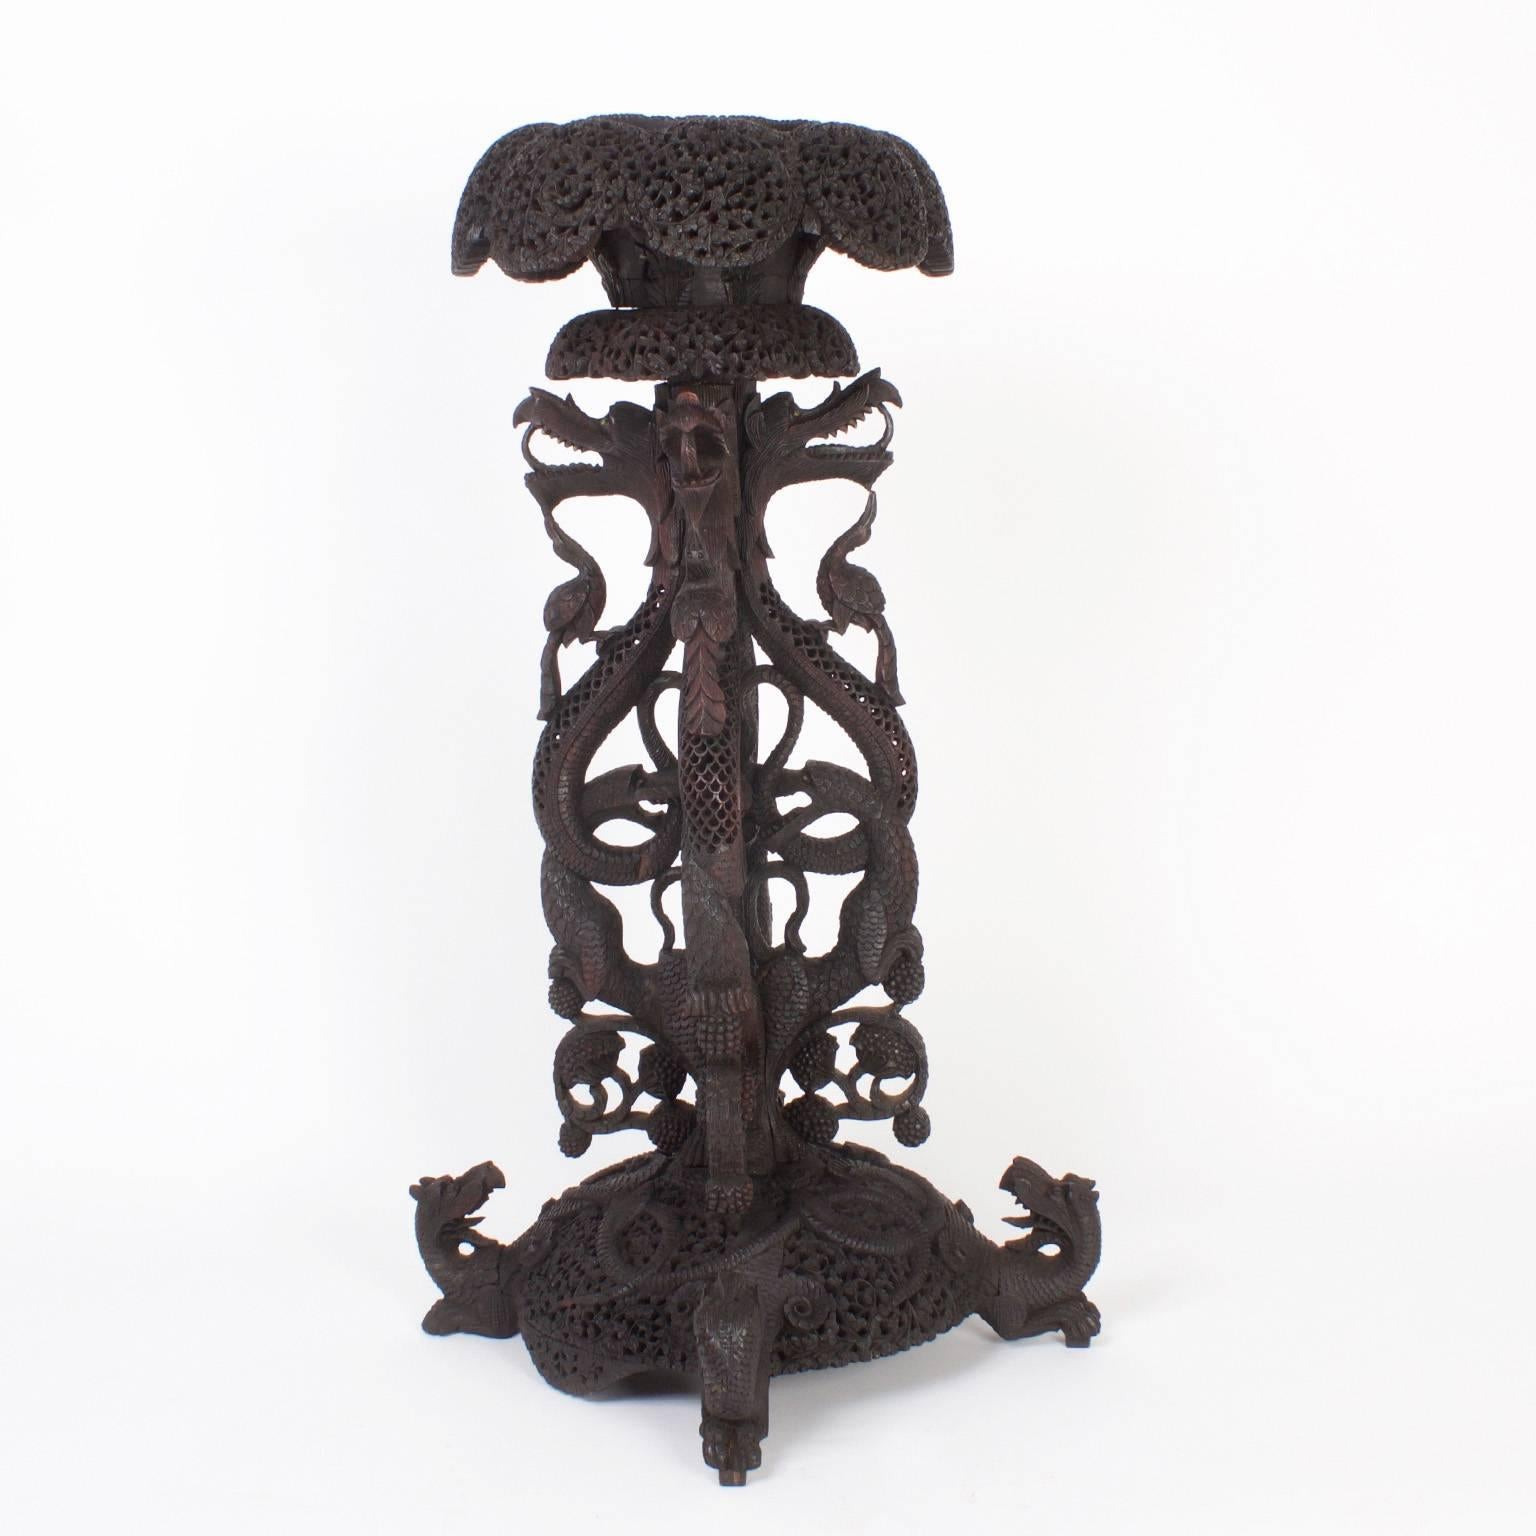 Intriguing Anglo-Indian pedestal expertly carved from tropical hard wood and transformed into this mythological composition with flowers, dragons, phoenix birds, eagles, swans, snakes, and fruit. The best of this genre we have seen.